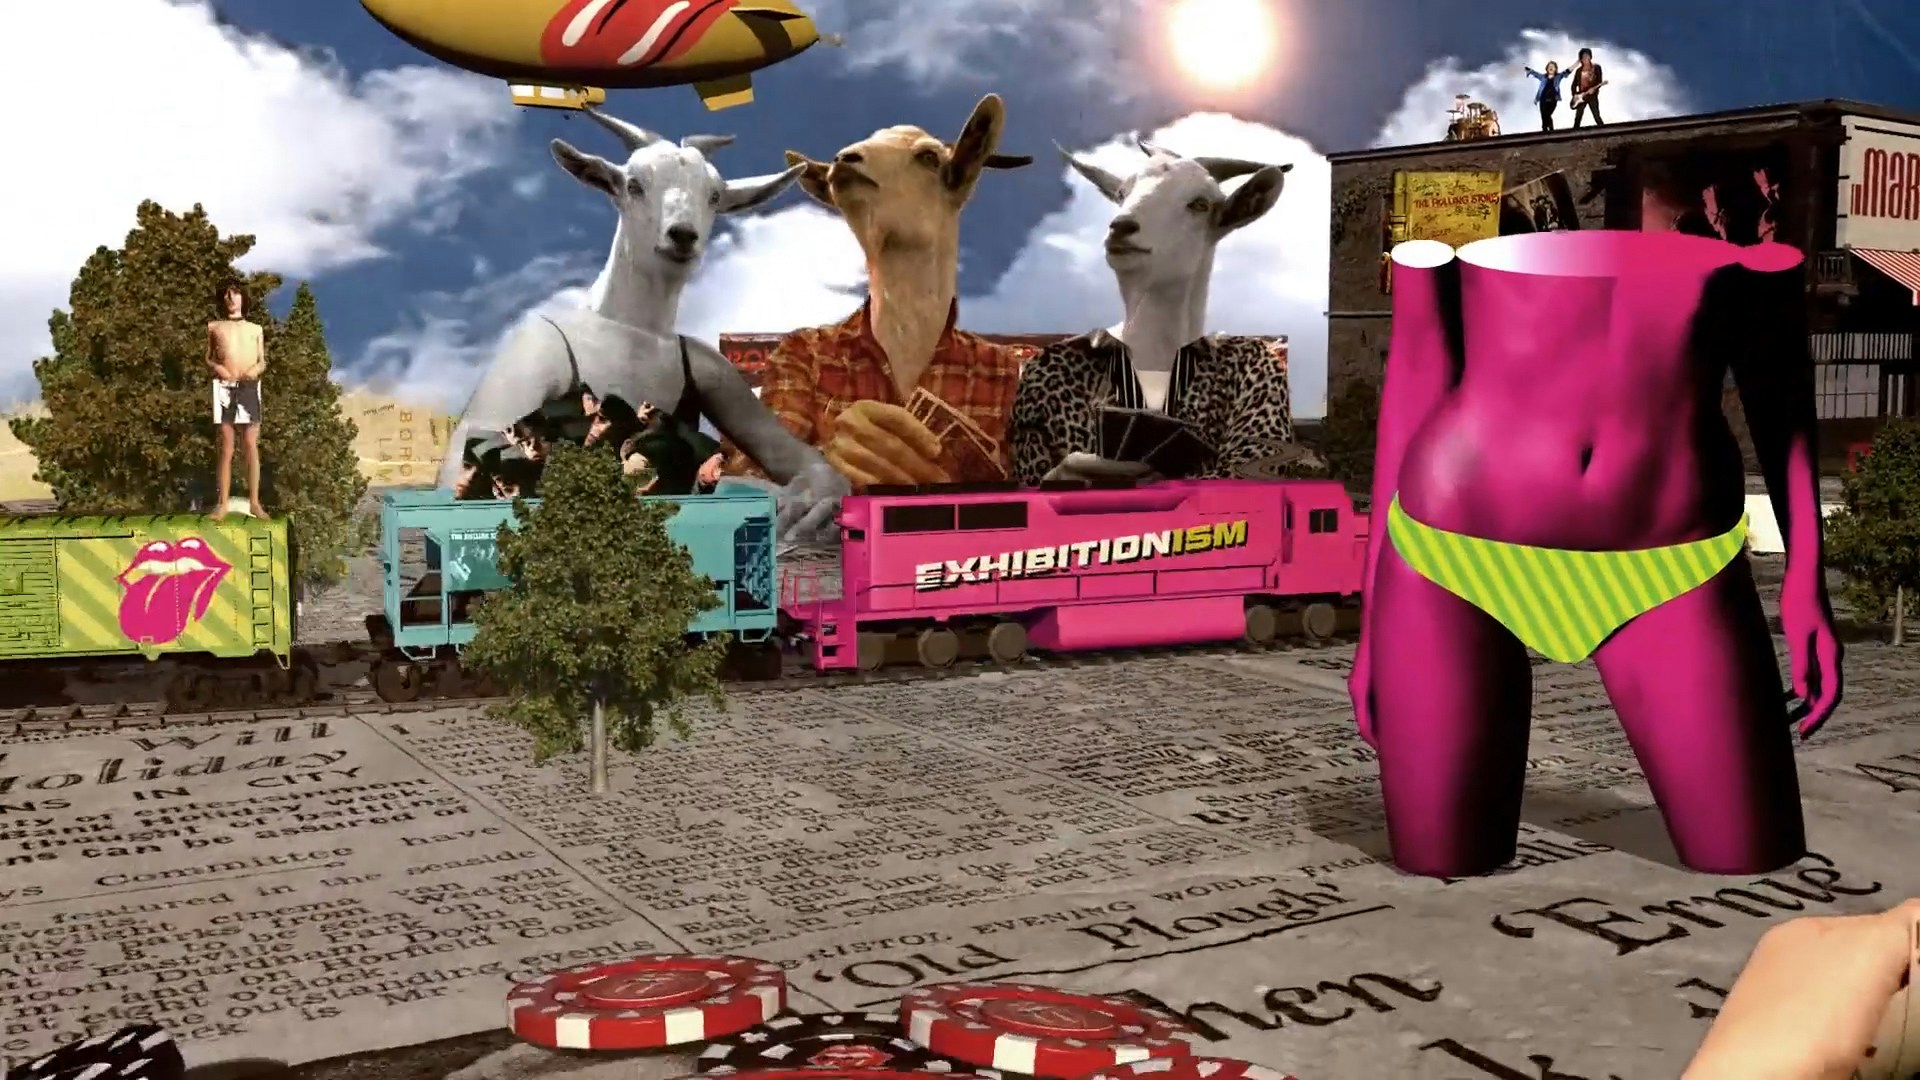 The Rolling Stones Exhibitionism train goats